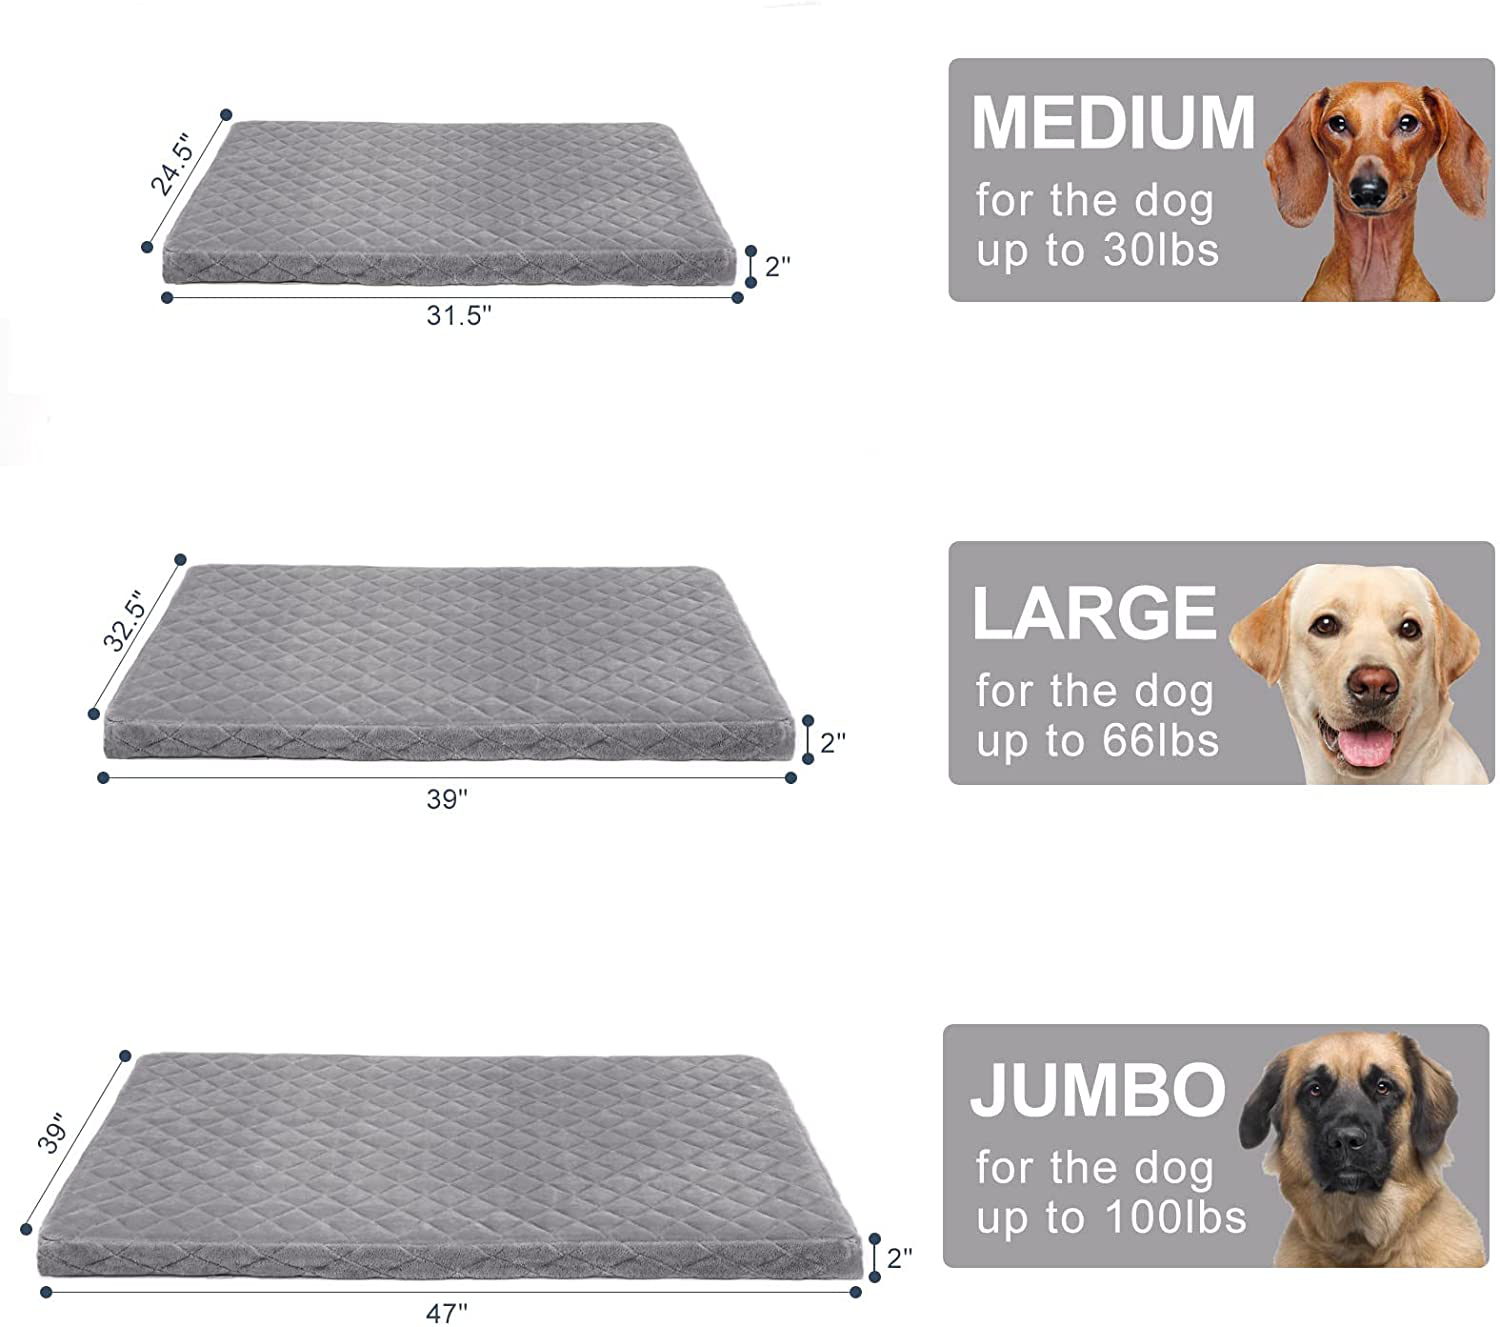 Hero Dog Large Dog Bed Orthopedic Foam Pet Beds for Large, Jumbo and Medium Dogs up to 100Lbs, Dog Crate Foam Bed with anti Slip Bottom and Removable Washable Cover, Multi Colors